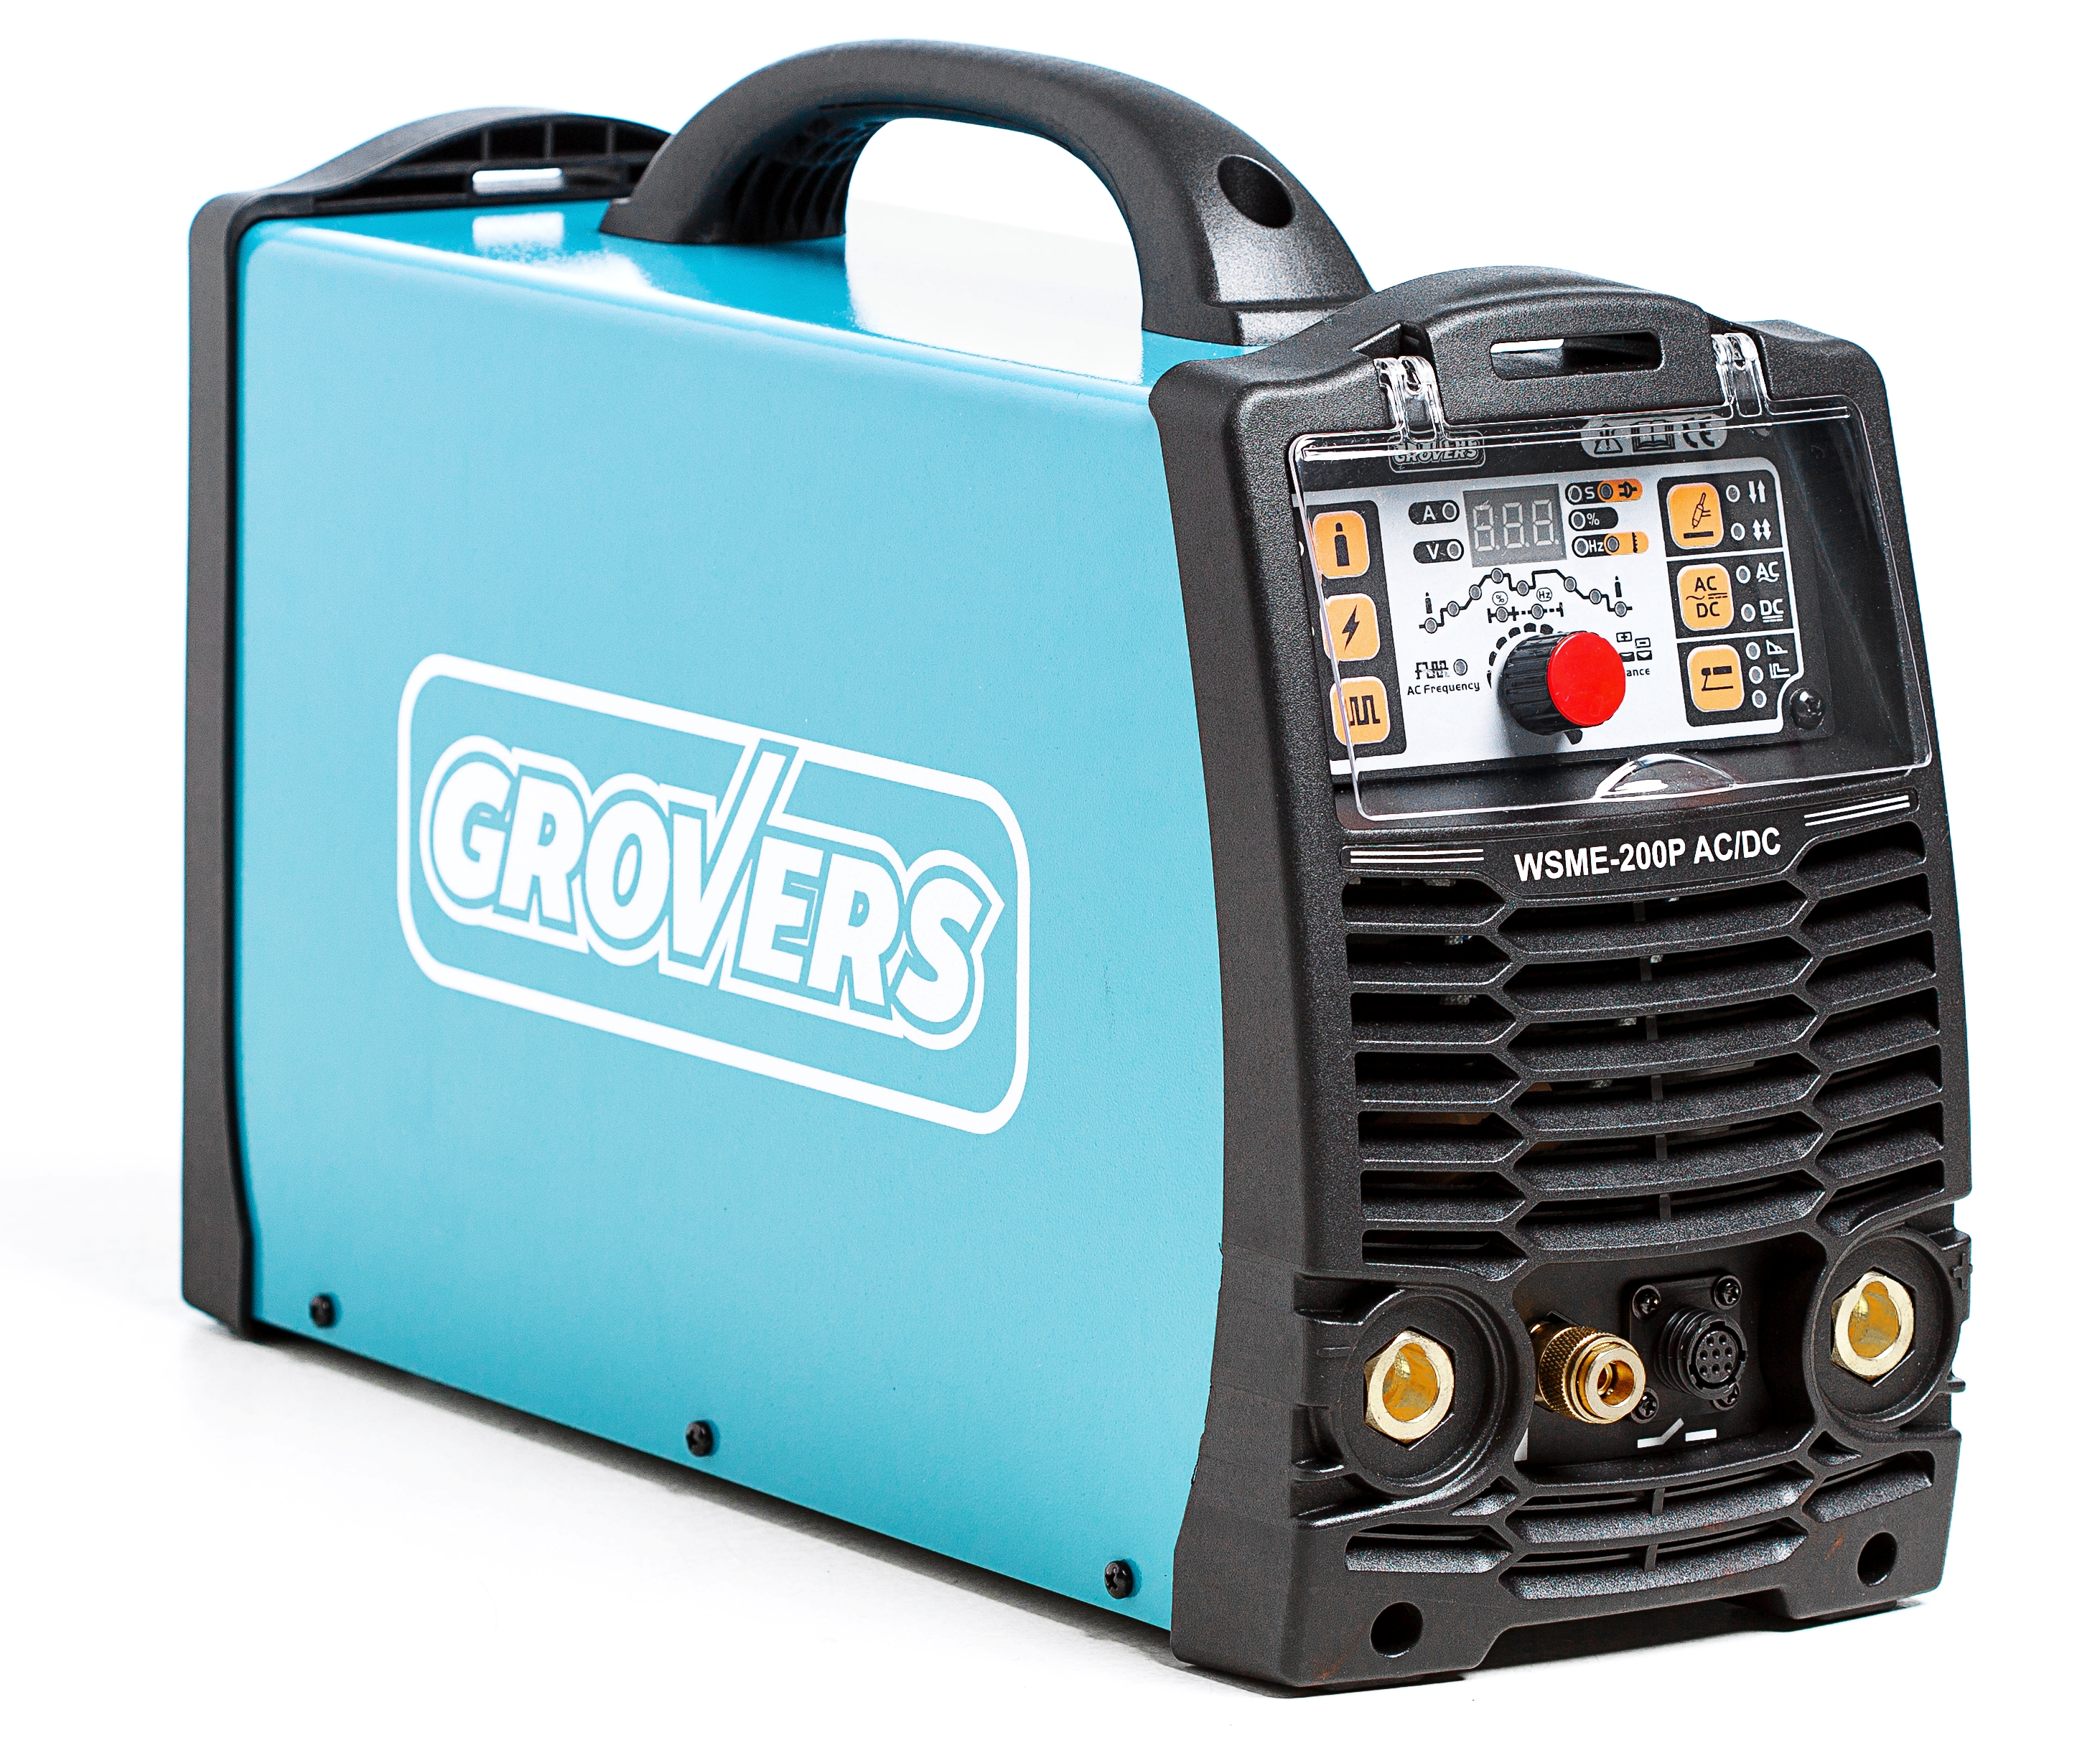 GROVERS WSME-200P ACDC